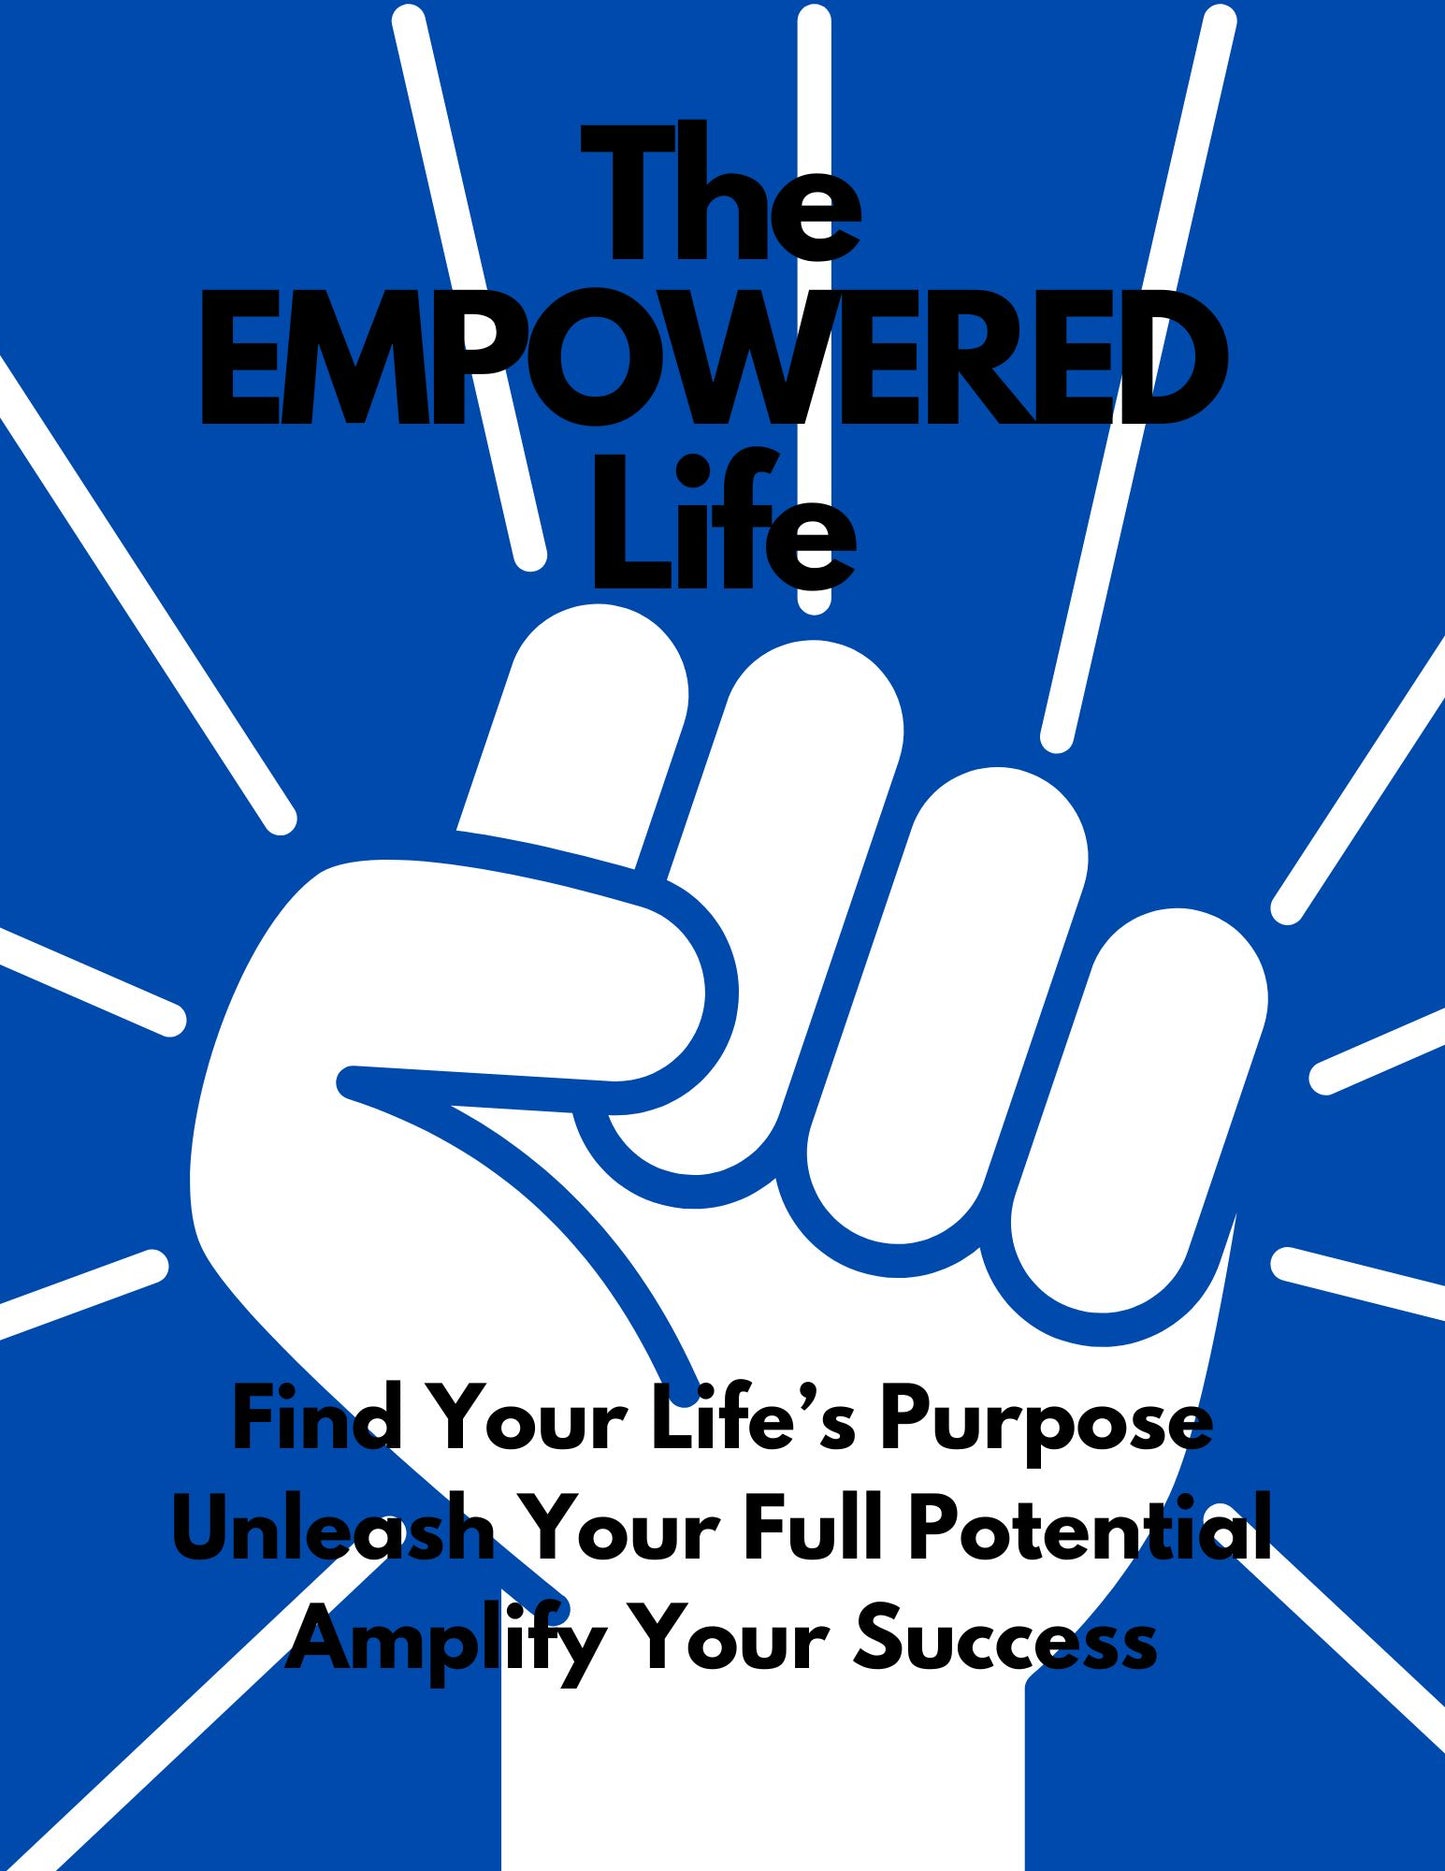 The Empowered Life: A Self Improvement eBook for Men - Download Delight